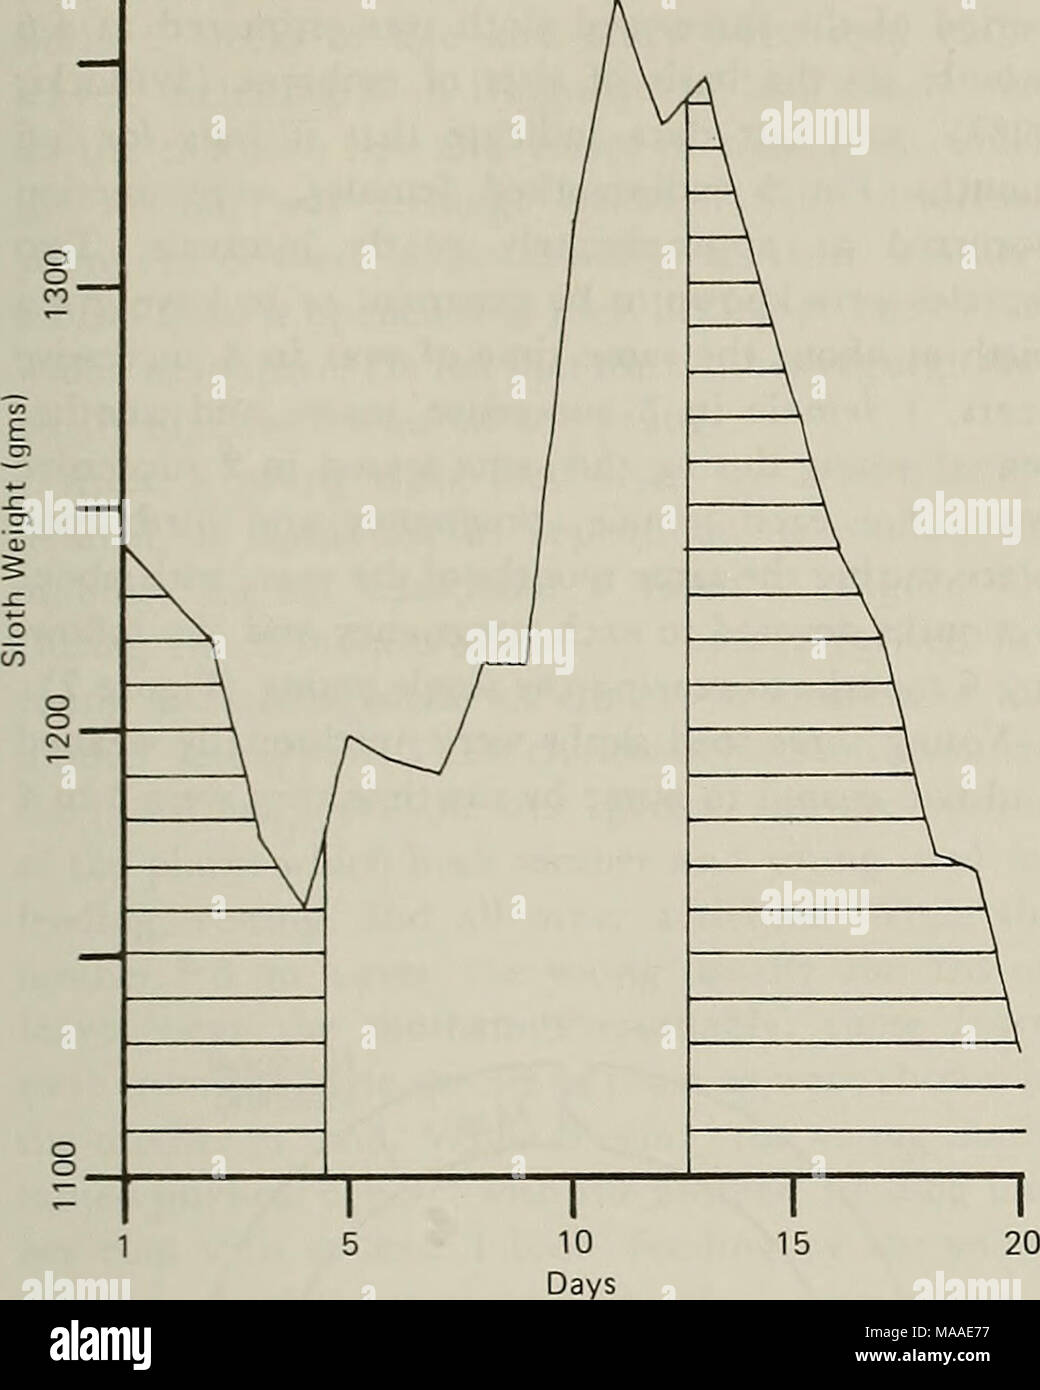 . The Ecology of arboreal folivores : a symposium held at the Conservation and Research Center, National Zoological Park, Smithsonian Institution, May 29-31, 1975 . Figure 6. Changes in body weight of a young captive three-toed sloth fed on an alternating diet of powdered, rehydrated leaf of Cecropia eximia and Lacmellea panamensis. Lacmellea leaf was about 1.6 times as digestible as Cecropia leaf. The sloth died at the end of the experiment. and the amount eaten. The difference between food input and feces outflow was greater when Lacmellea was fed, averaging 9.8 gm per day for Lacmellea leaf Stock Photo